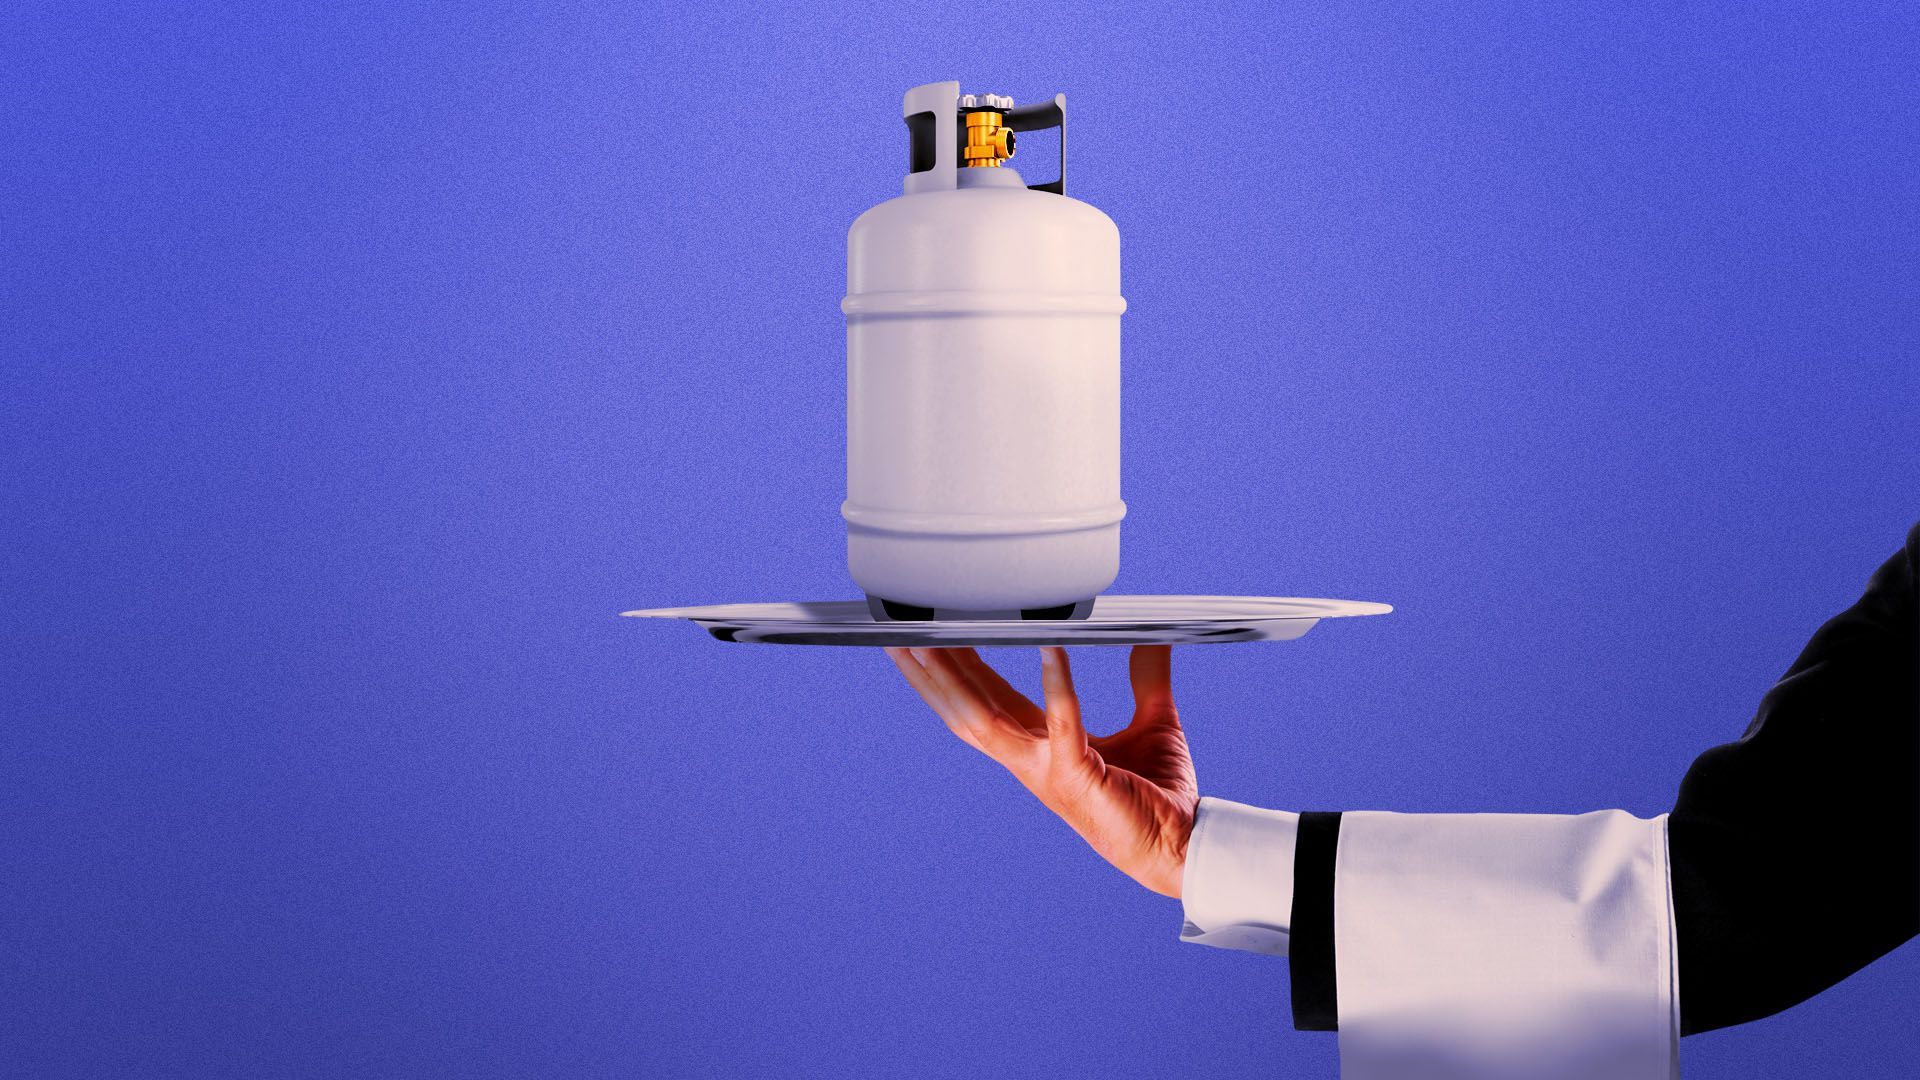 Illustration of a waiter holding a serving tray with a propane tank